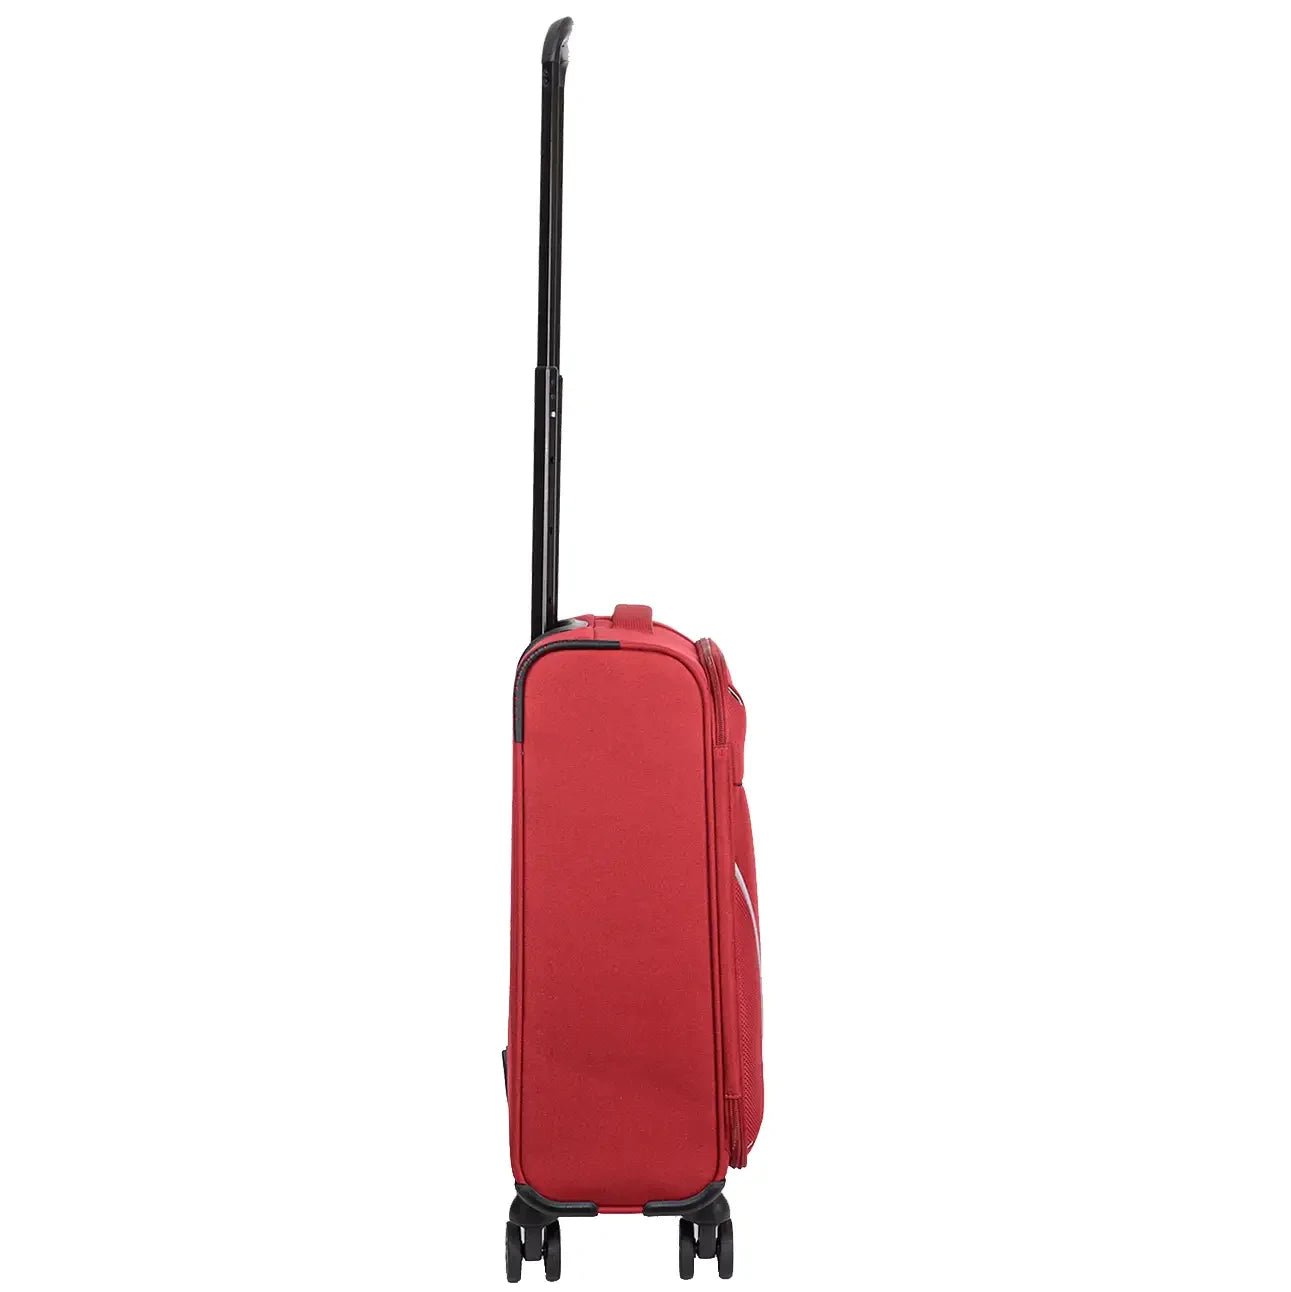 Valise cabine 4 roues Stratic Strong 55 cm - anthracite